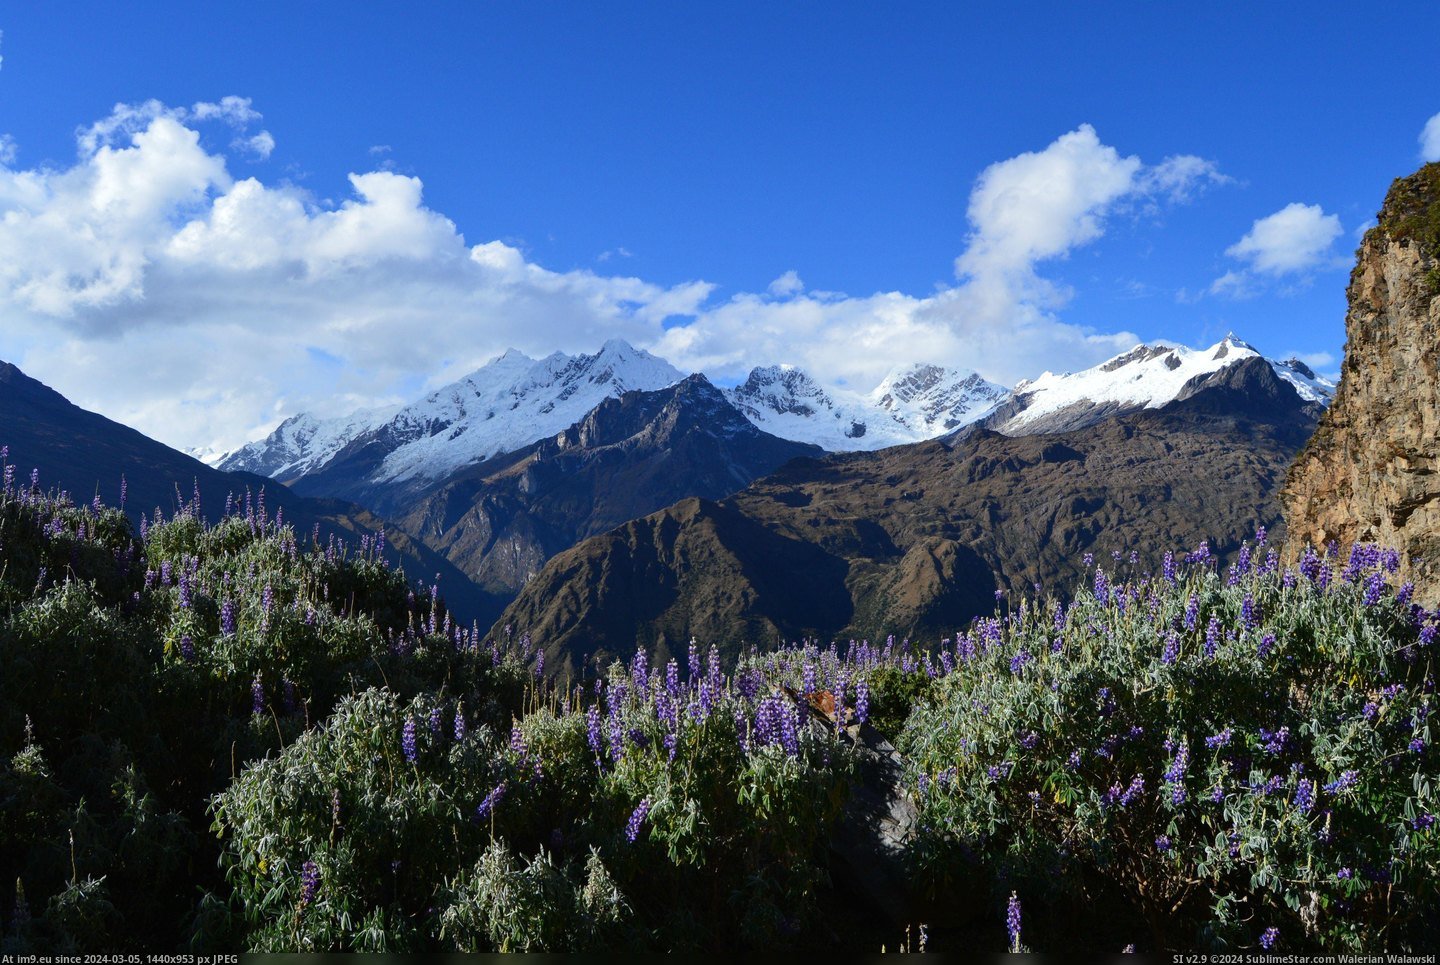 #Way #Wildflowers #Machu #Andes #Picchu [Earthporn] Wildflowers and the Andes on the way to Machu Picchu [OC] [3609x2400] Pic. (Изображение из альбом My r/EARTHPORN favs))